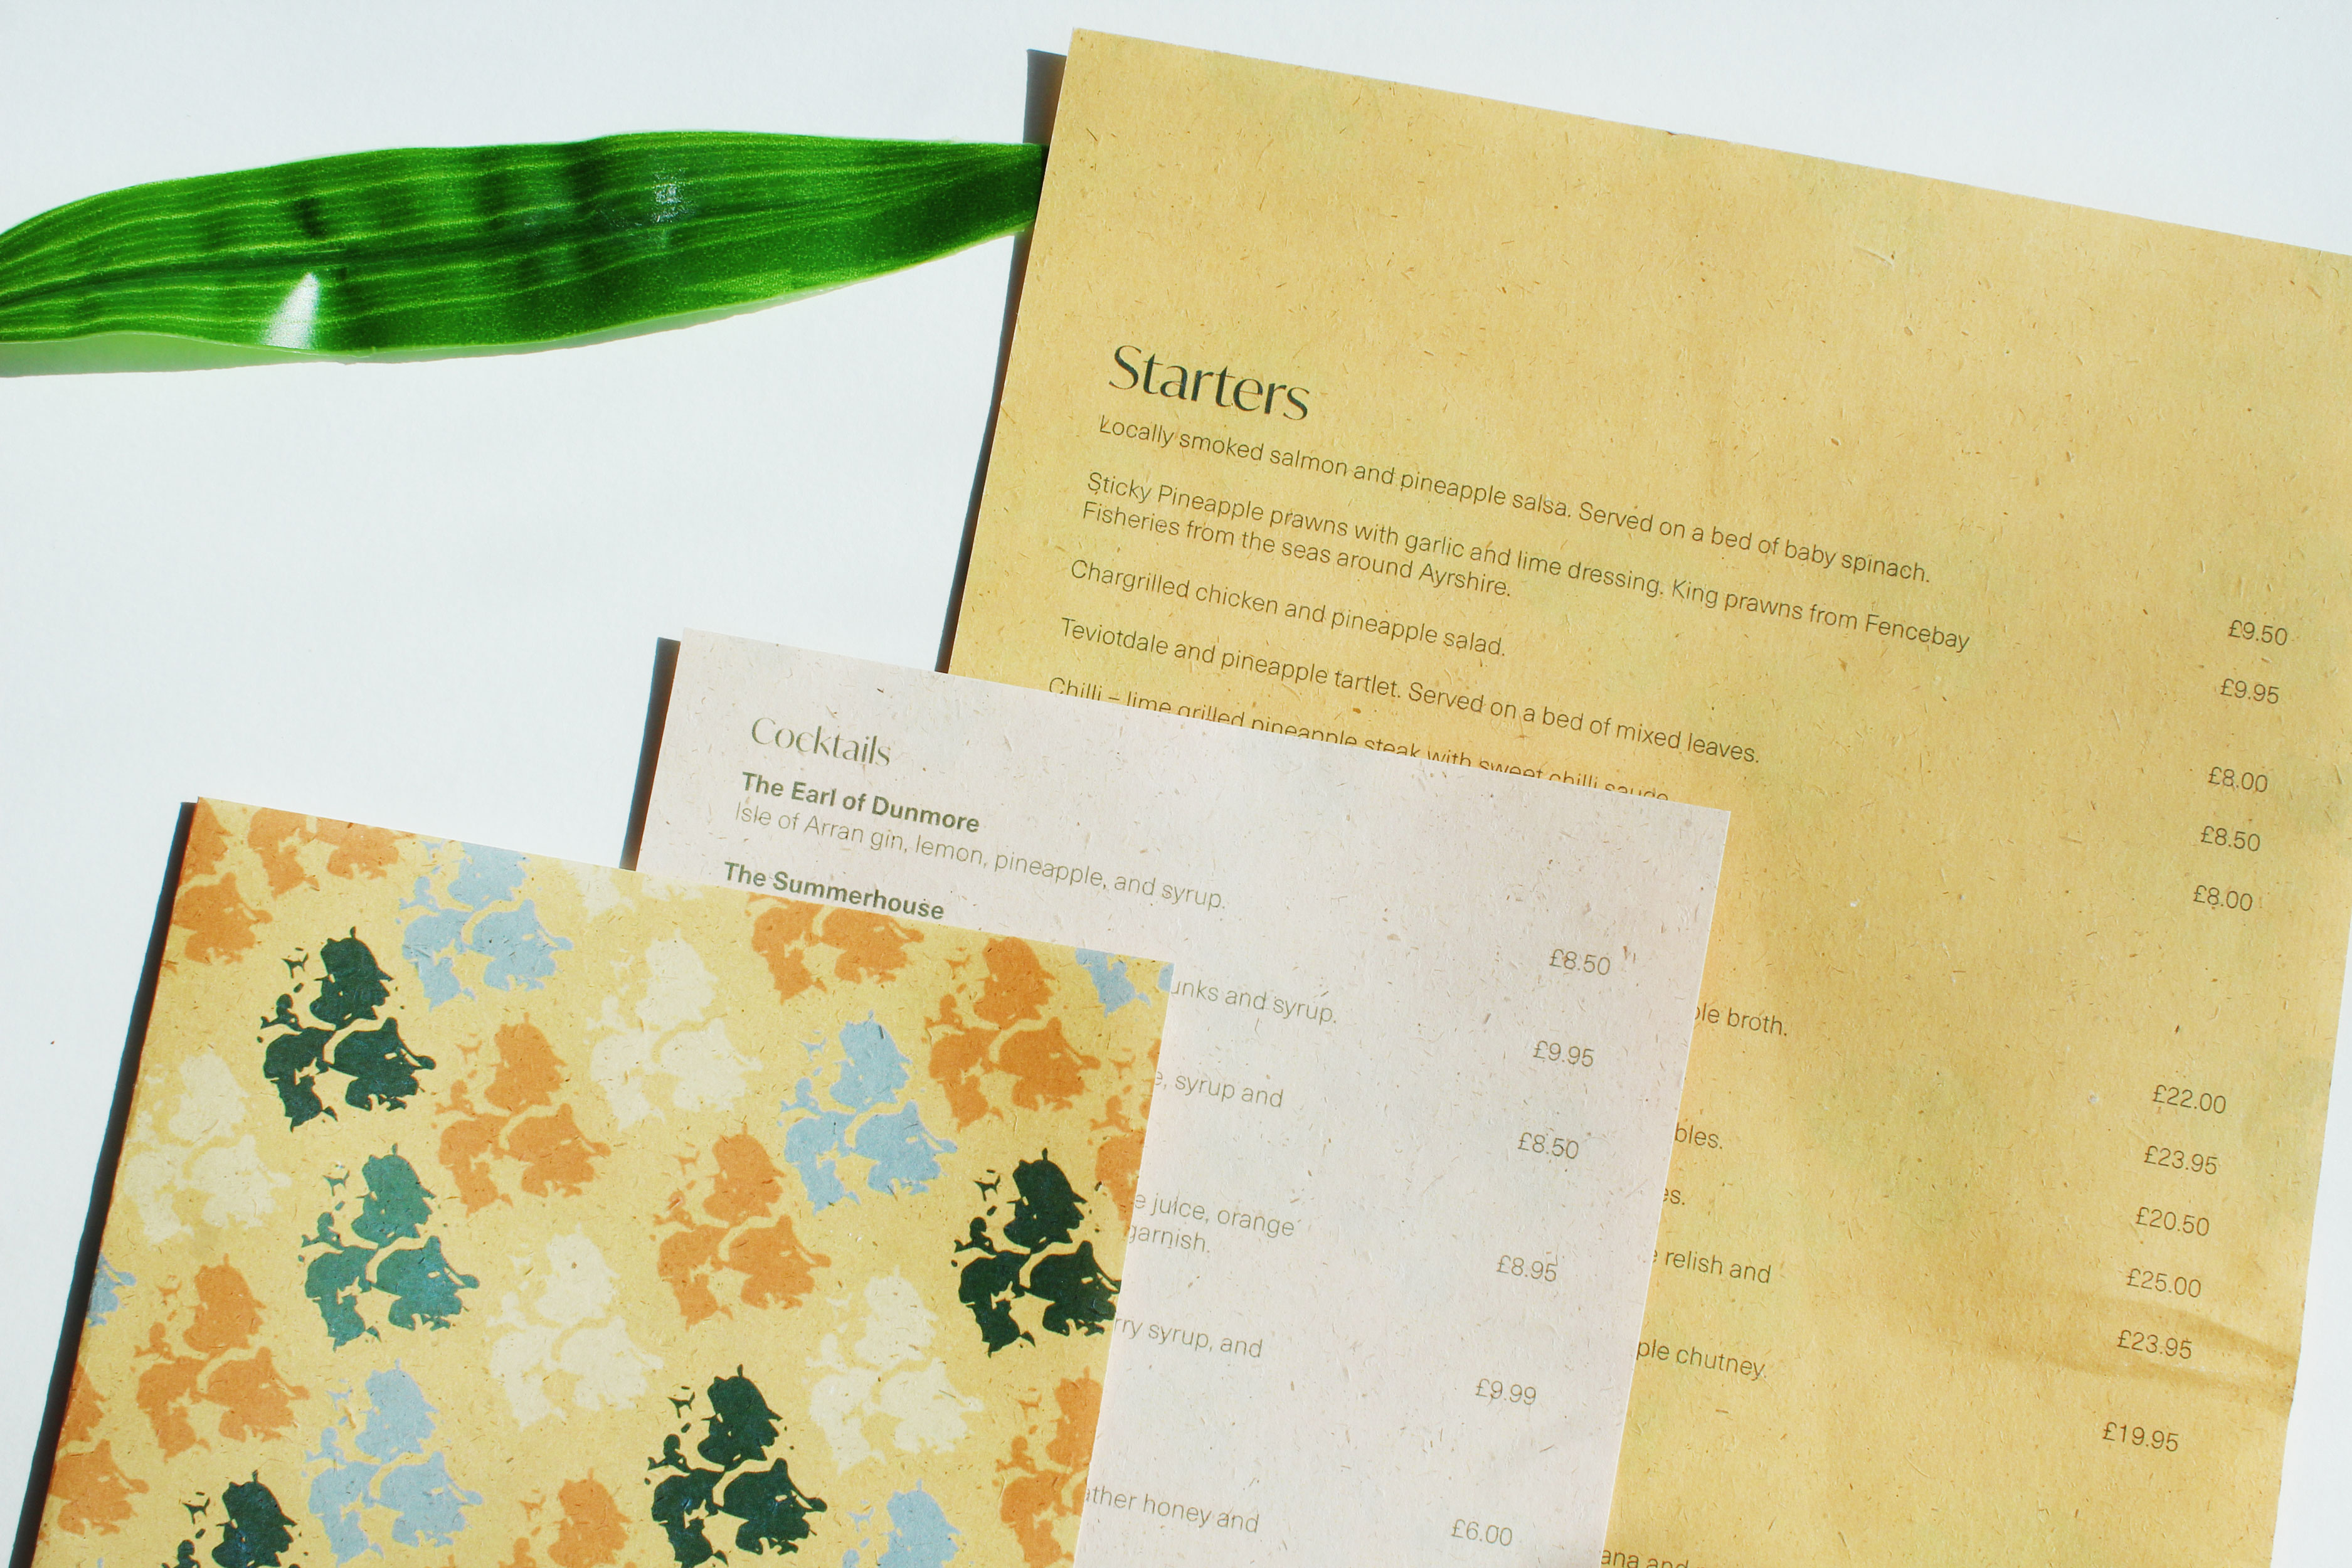 BA Graphic Communications work by Ellie Russell showing a restaurant menu based on pineapples.